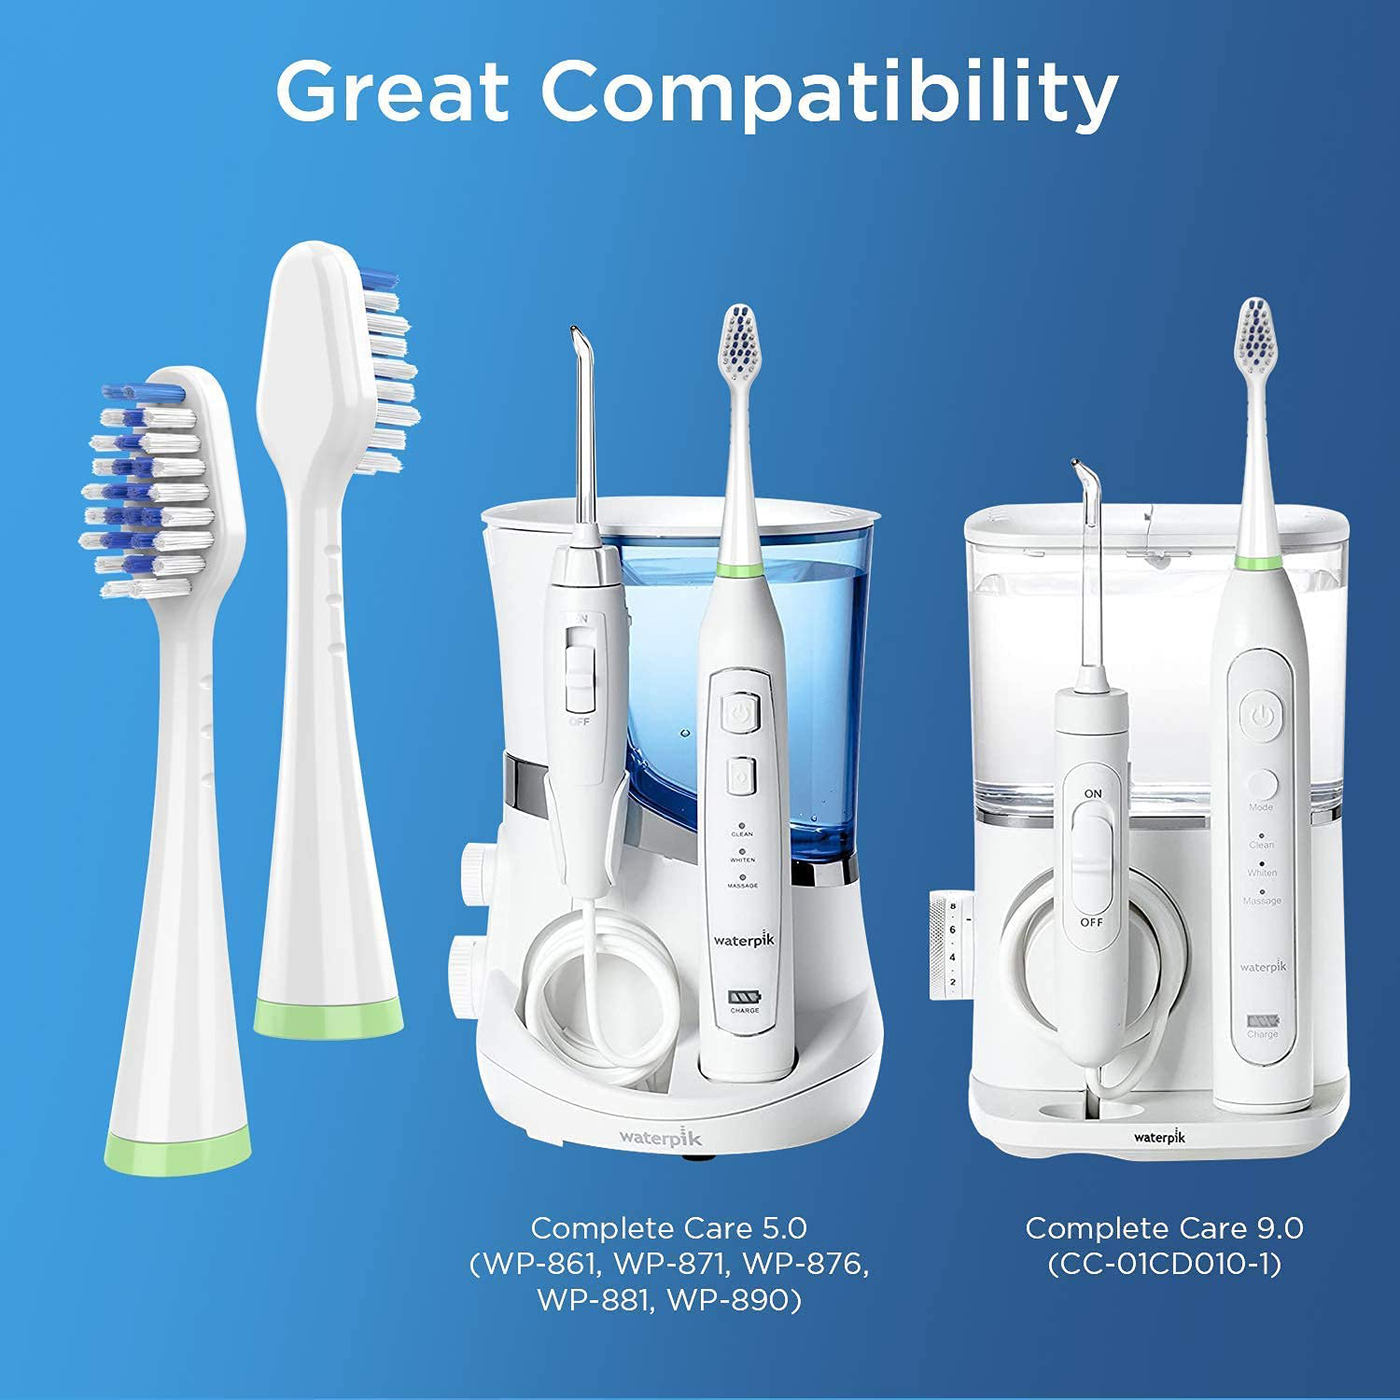 Toothbrush Replacement Heads for Waterpik Complete Care 5.0/9.0 (CC-01/WP-861)